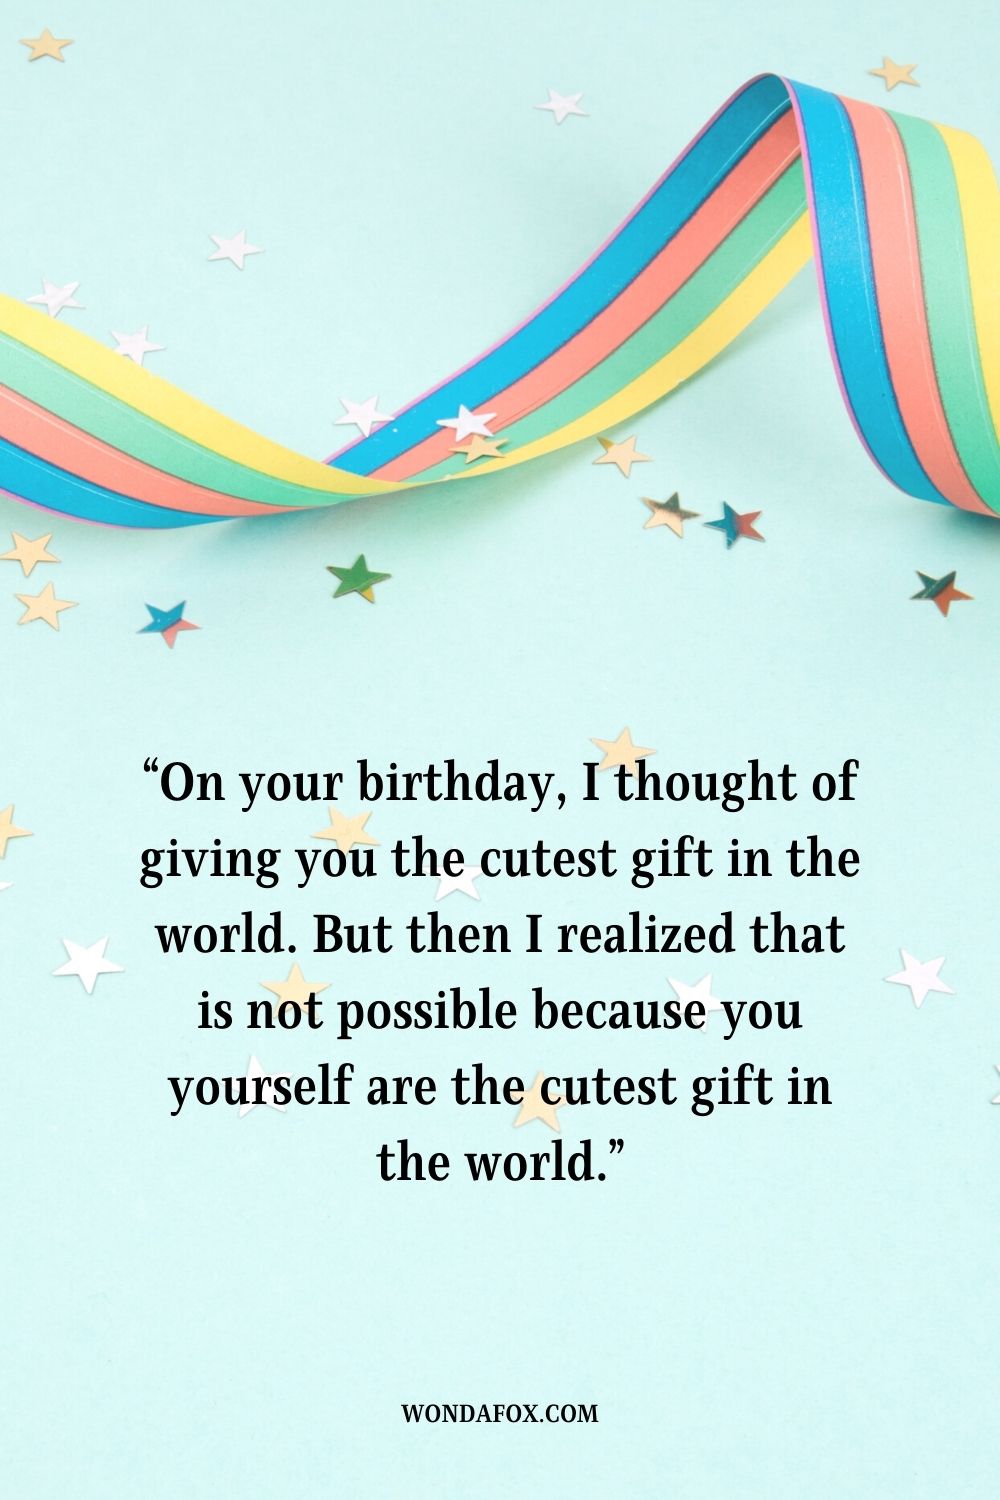 “On your birthday, I thought of giving you the cutest gift in the world. But then I realized that is not possible because you yourself are the cutest gift in the world.”